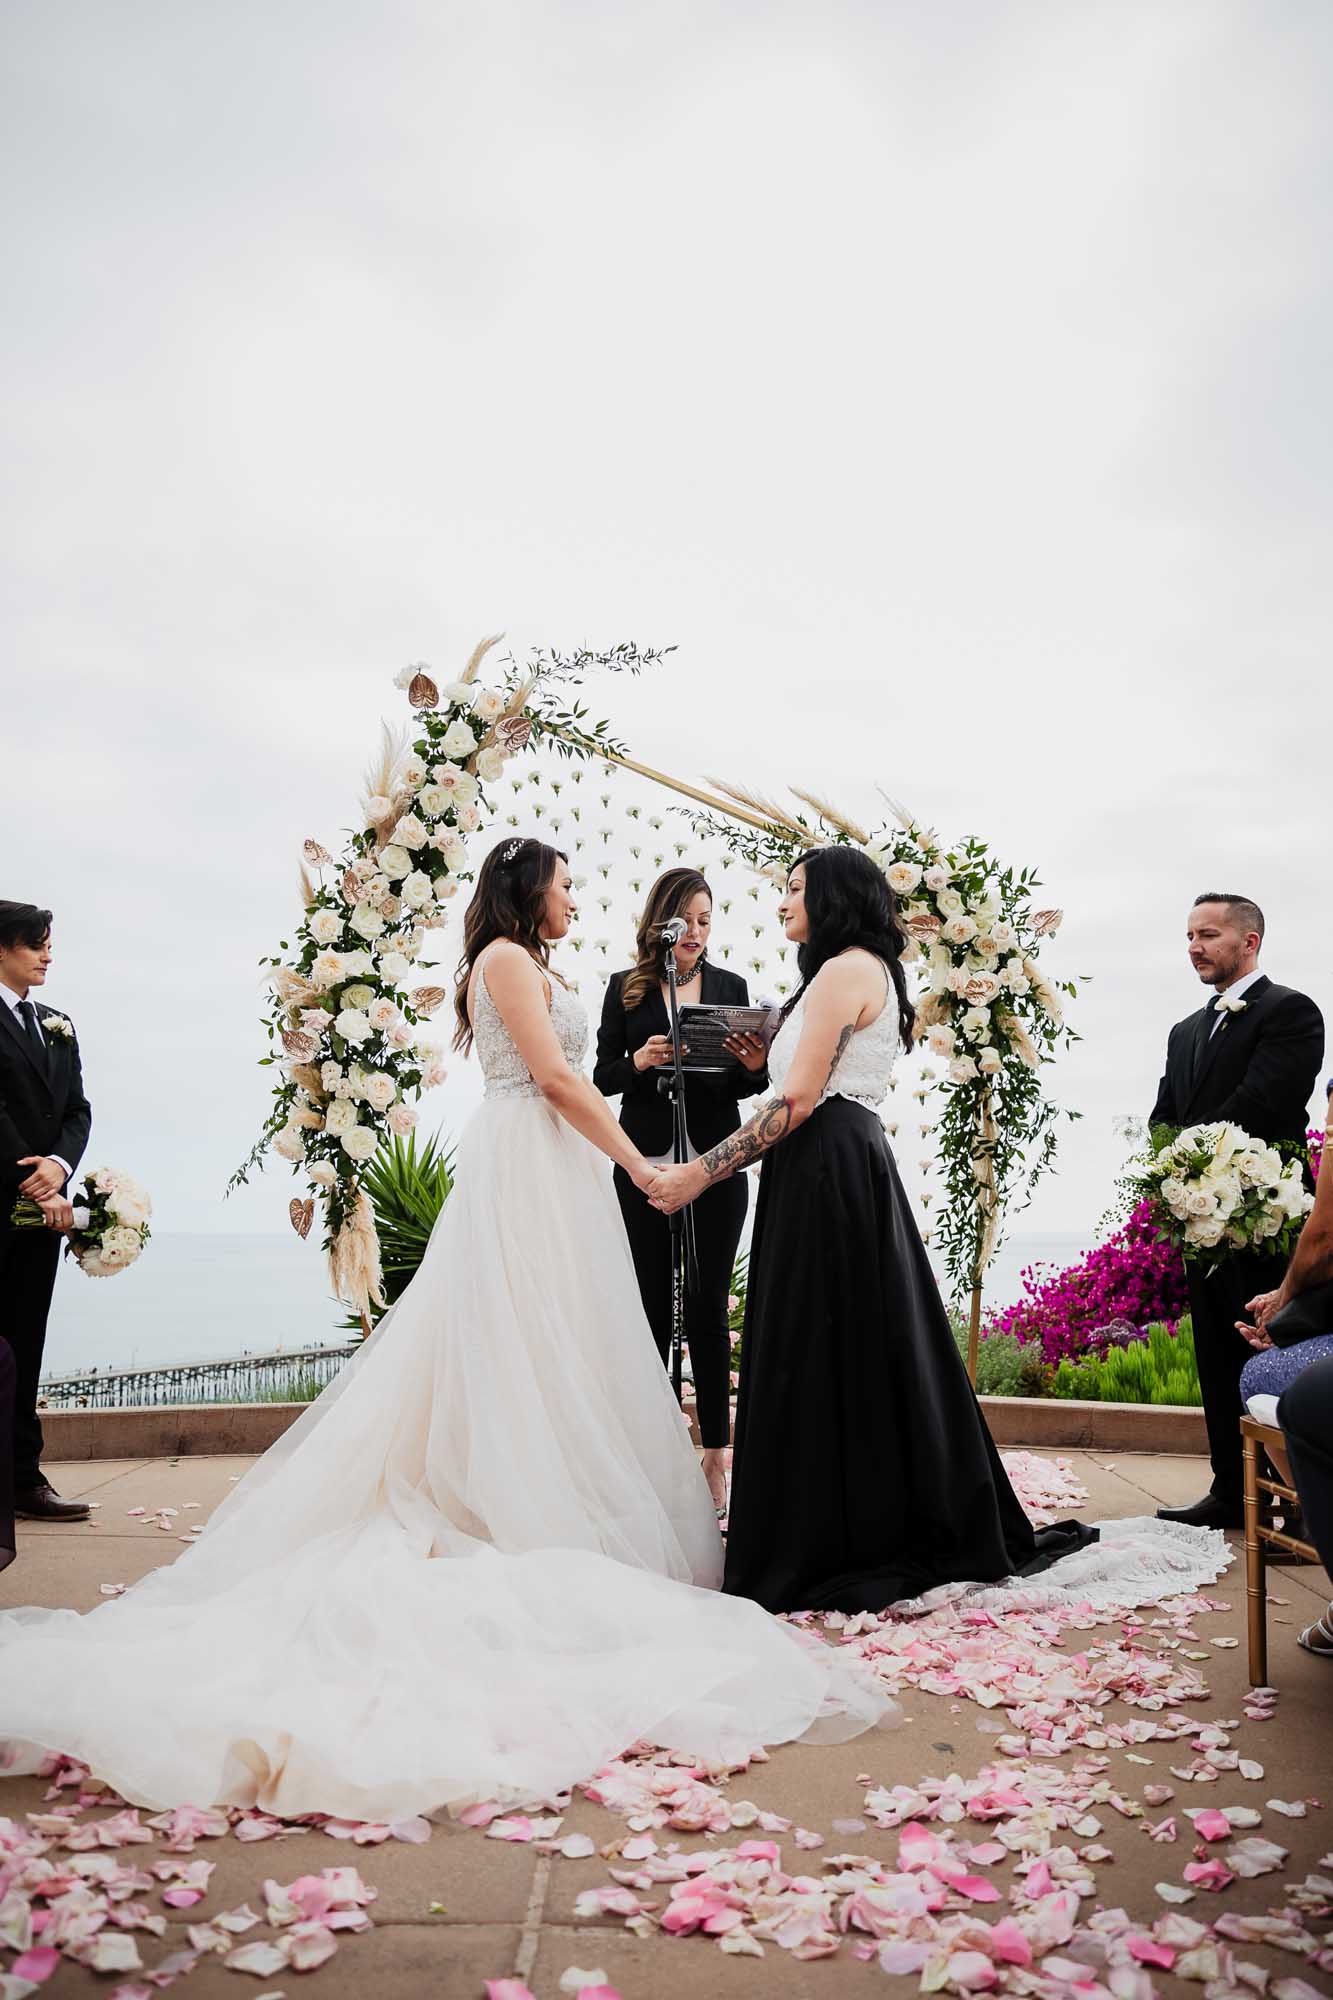 Romantic California wedding with an ocean view | Sarah Mack Photo | Featured on Equally Wed, the leading LGBTQ+ wedding magazine